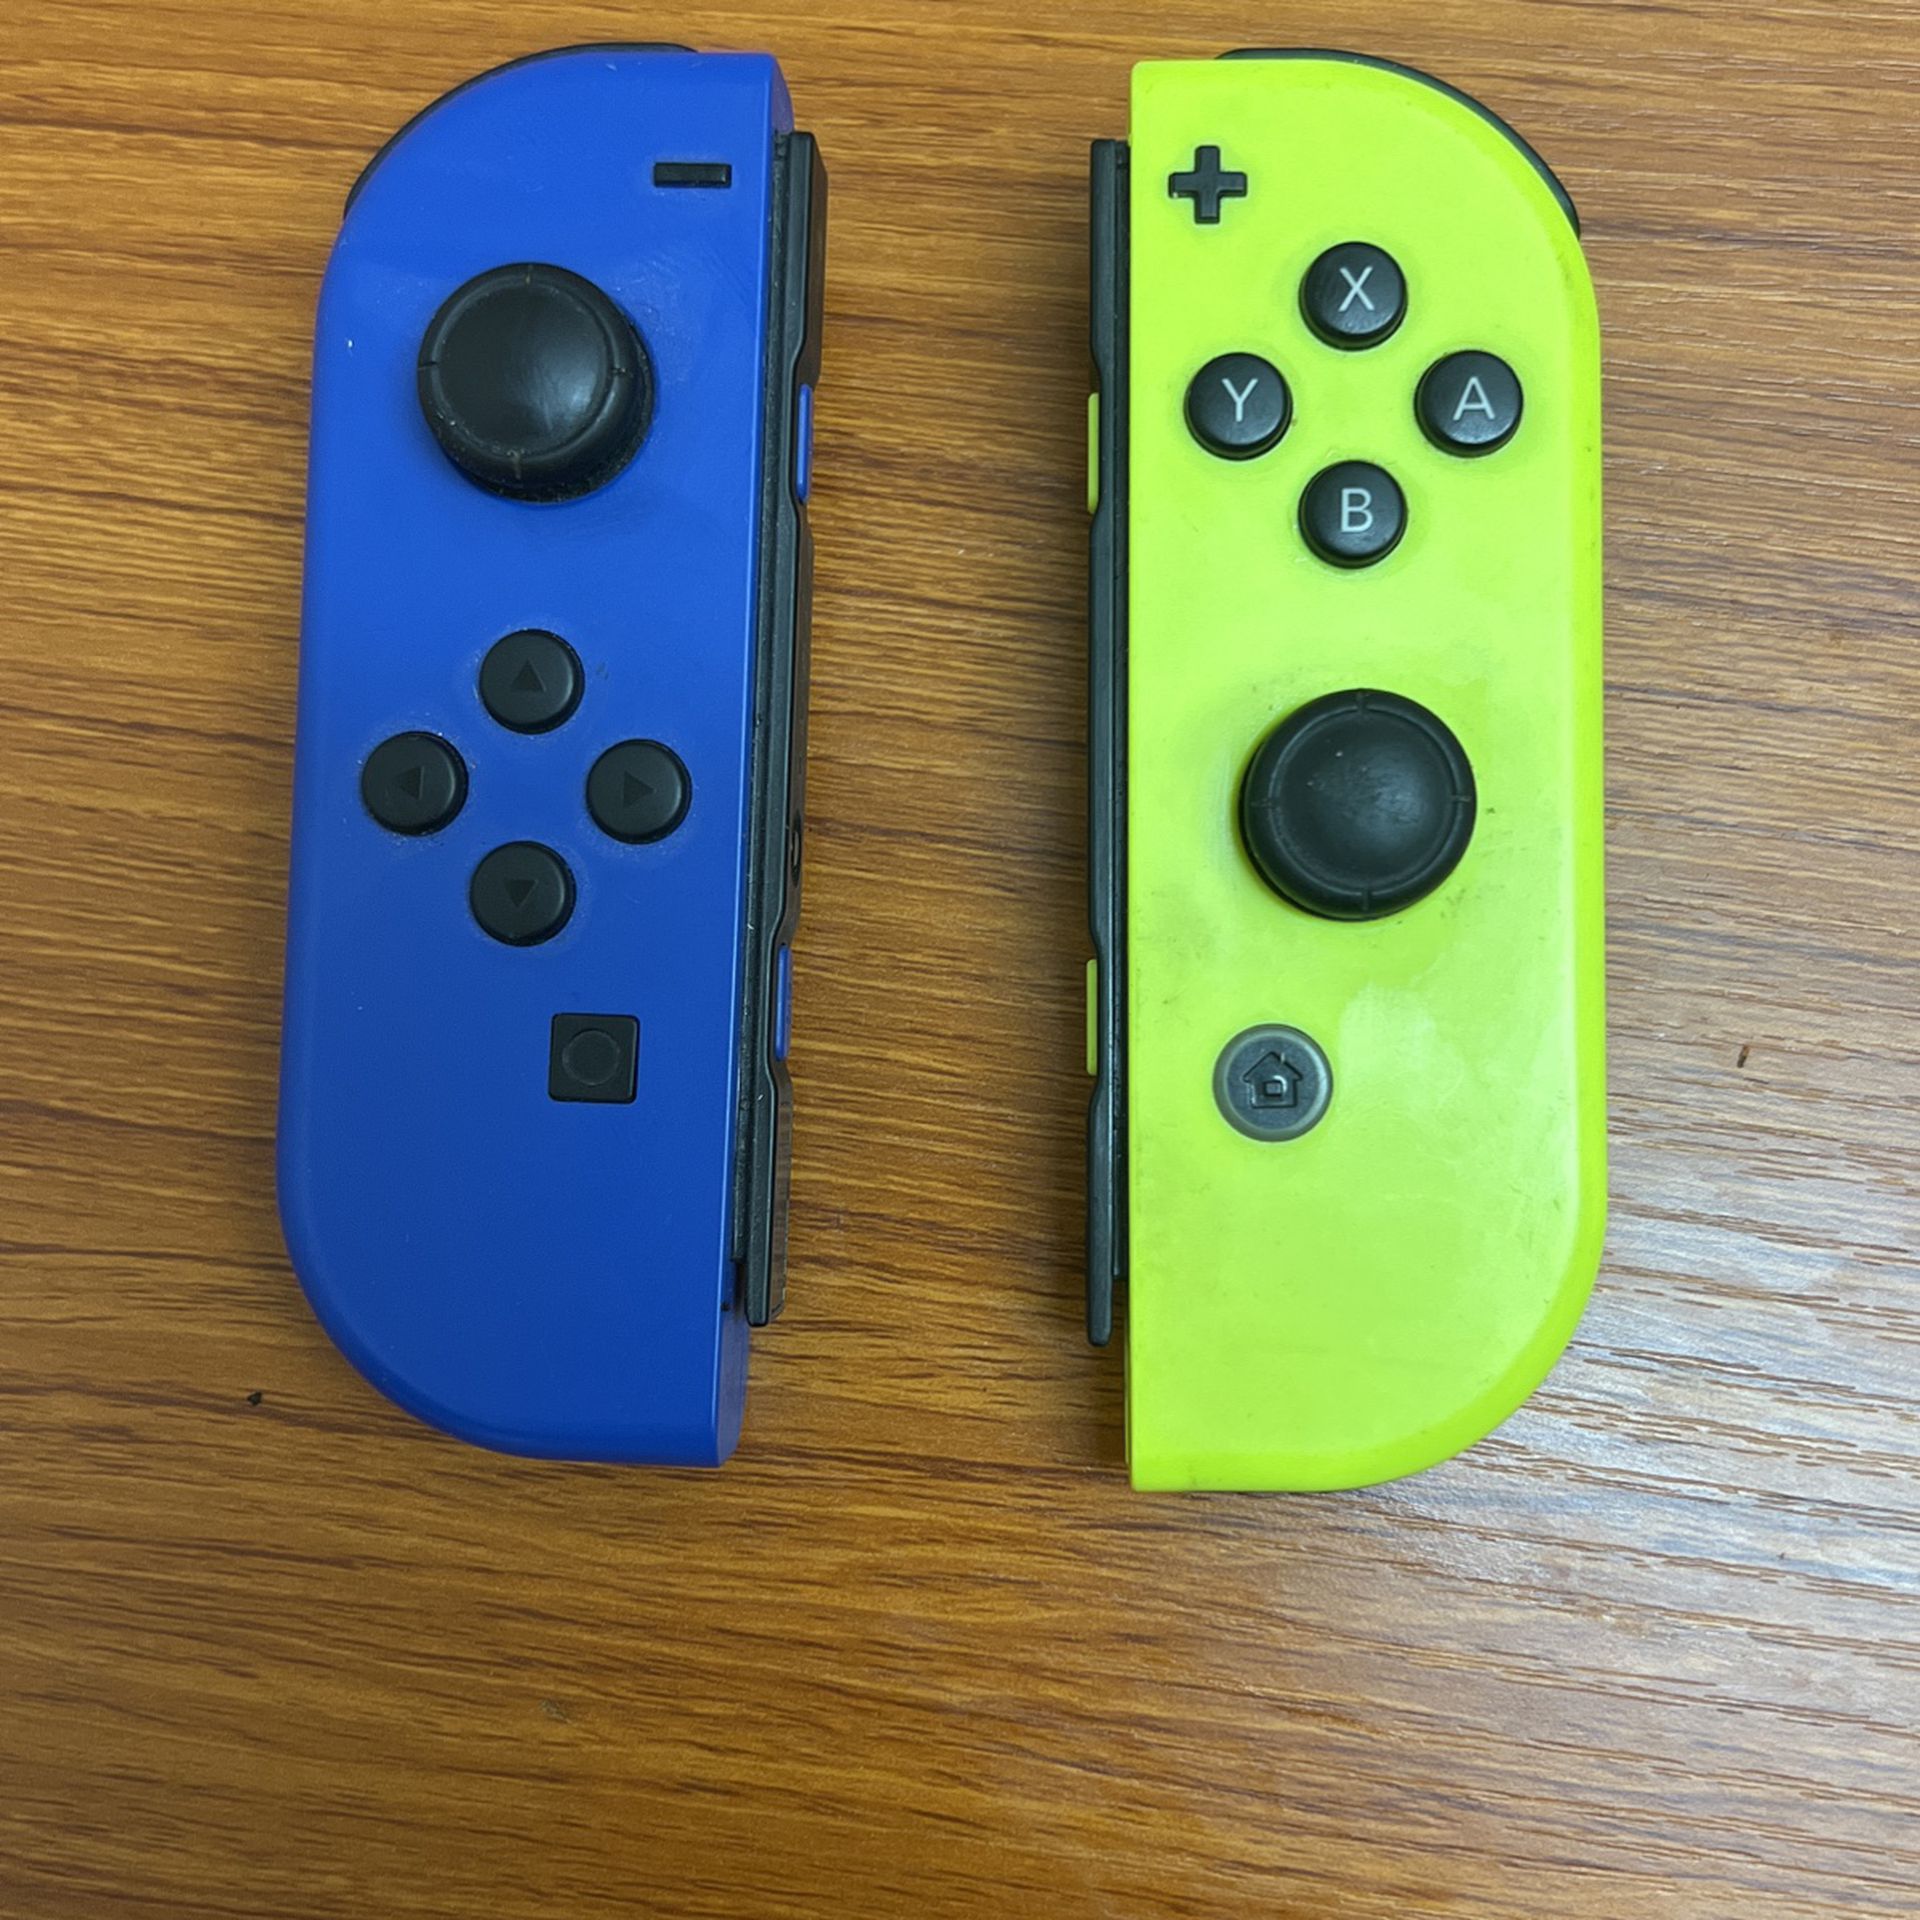 Nintendo Switch Controllers 